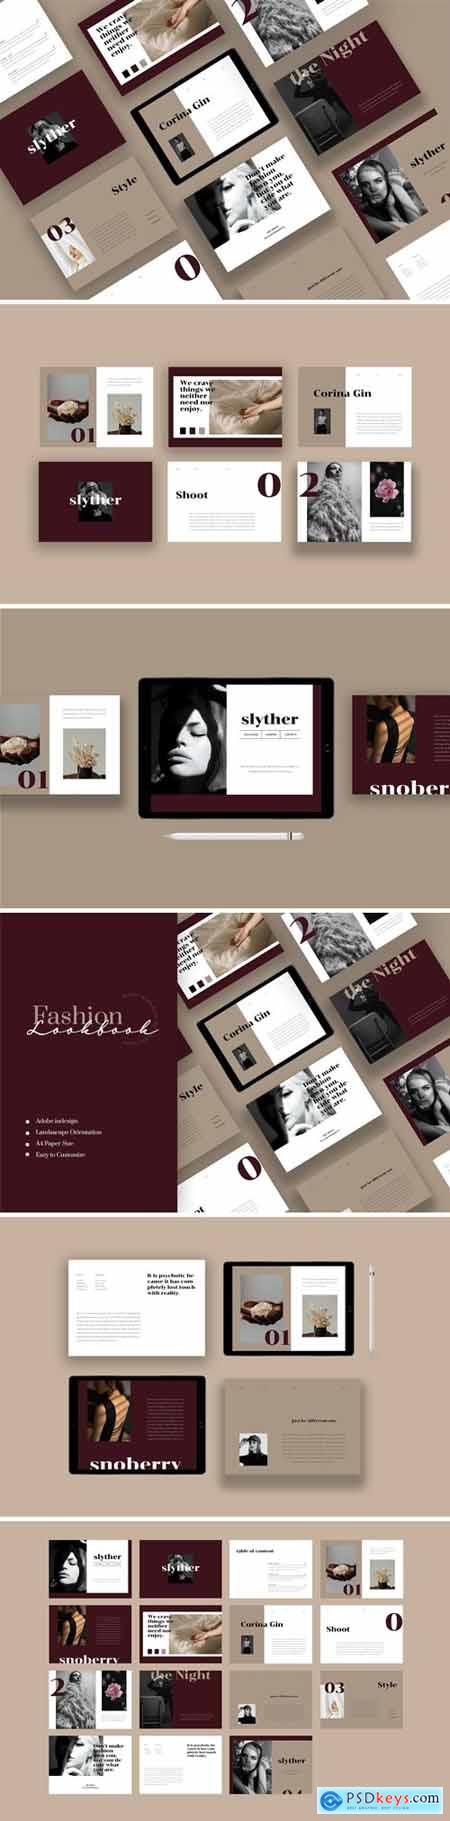 Slyther - Magazine Template